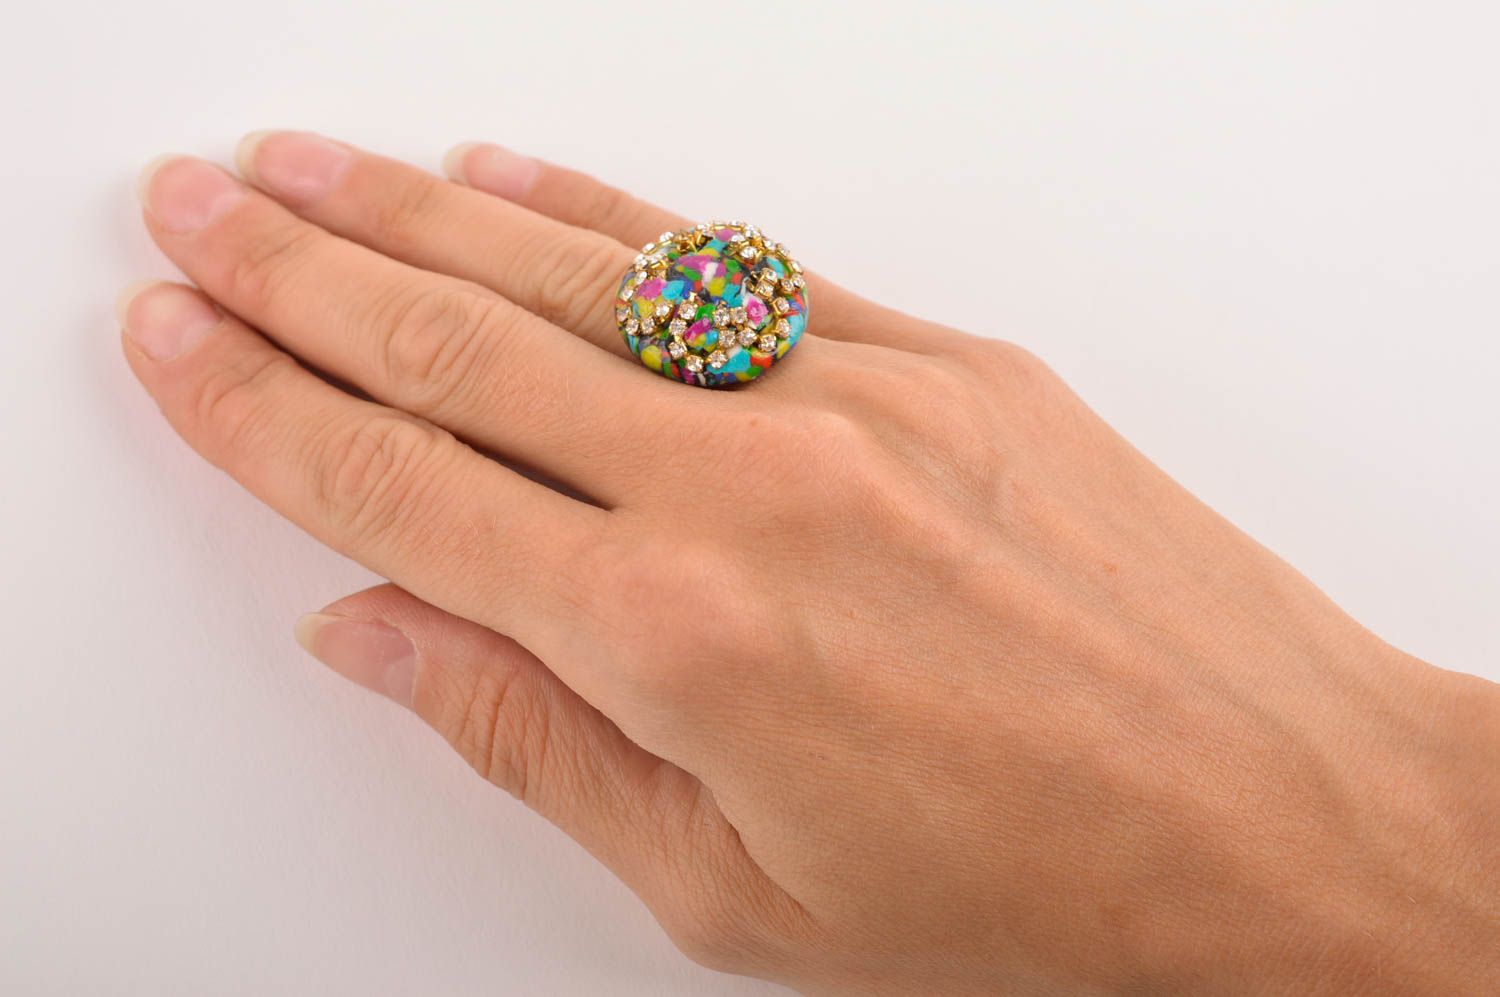 Handmade ring designer ring for women polymer clay accessory gift ideas  photo 5